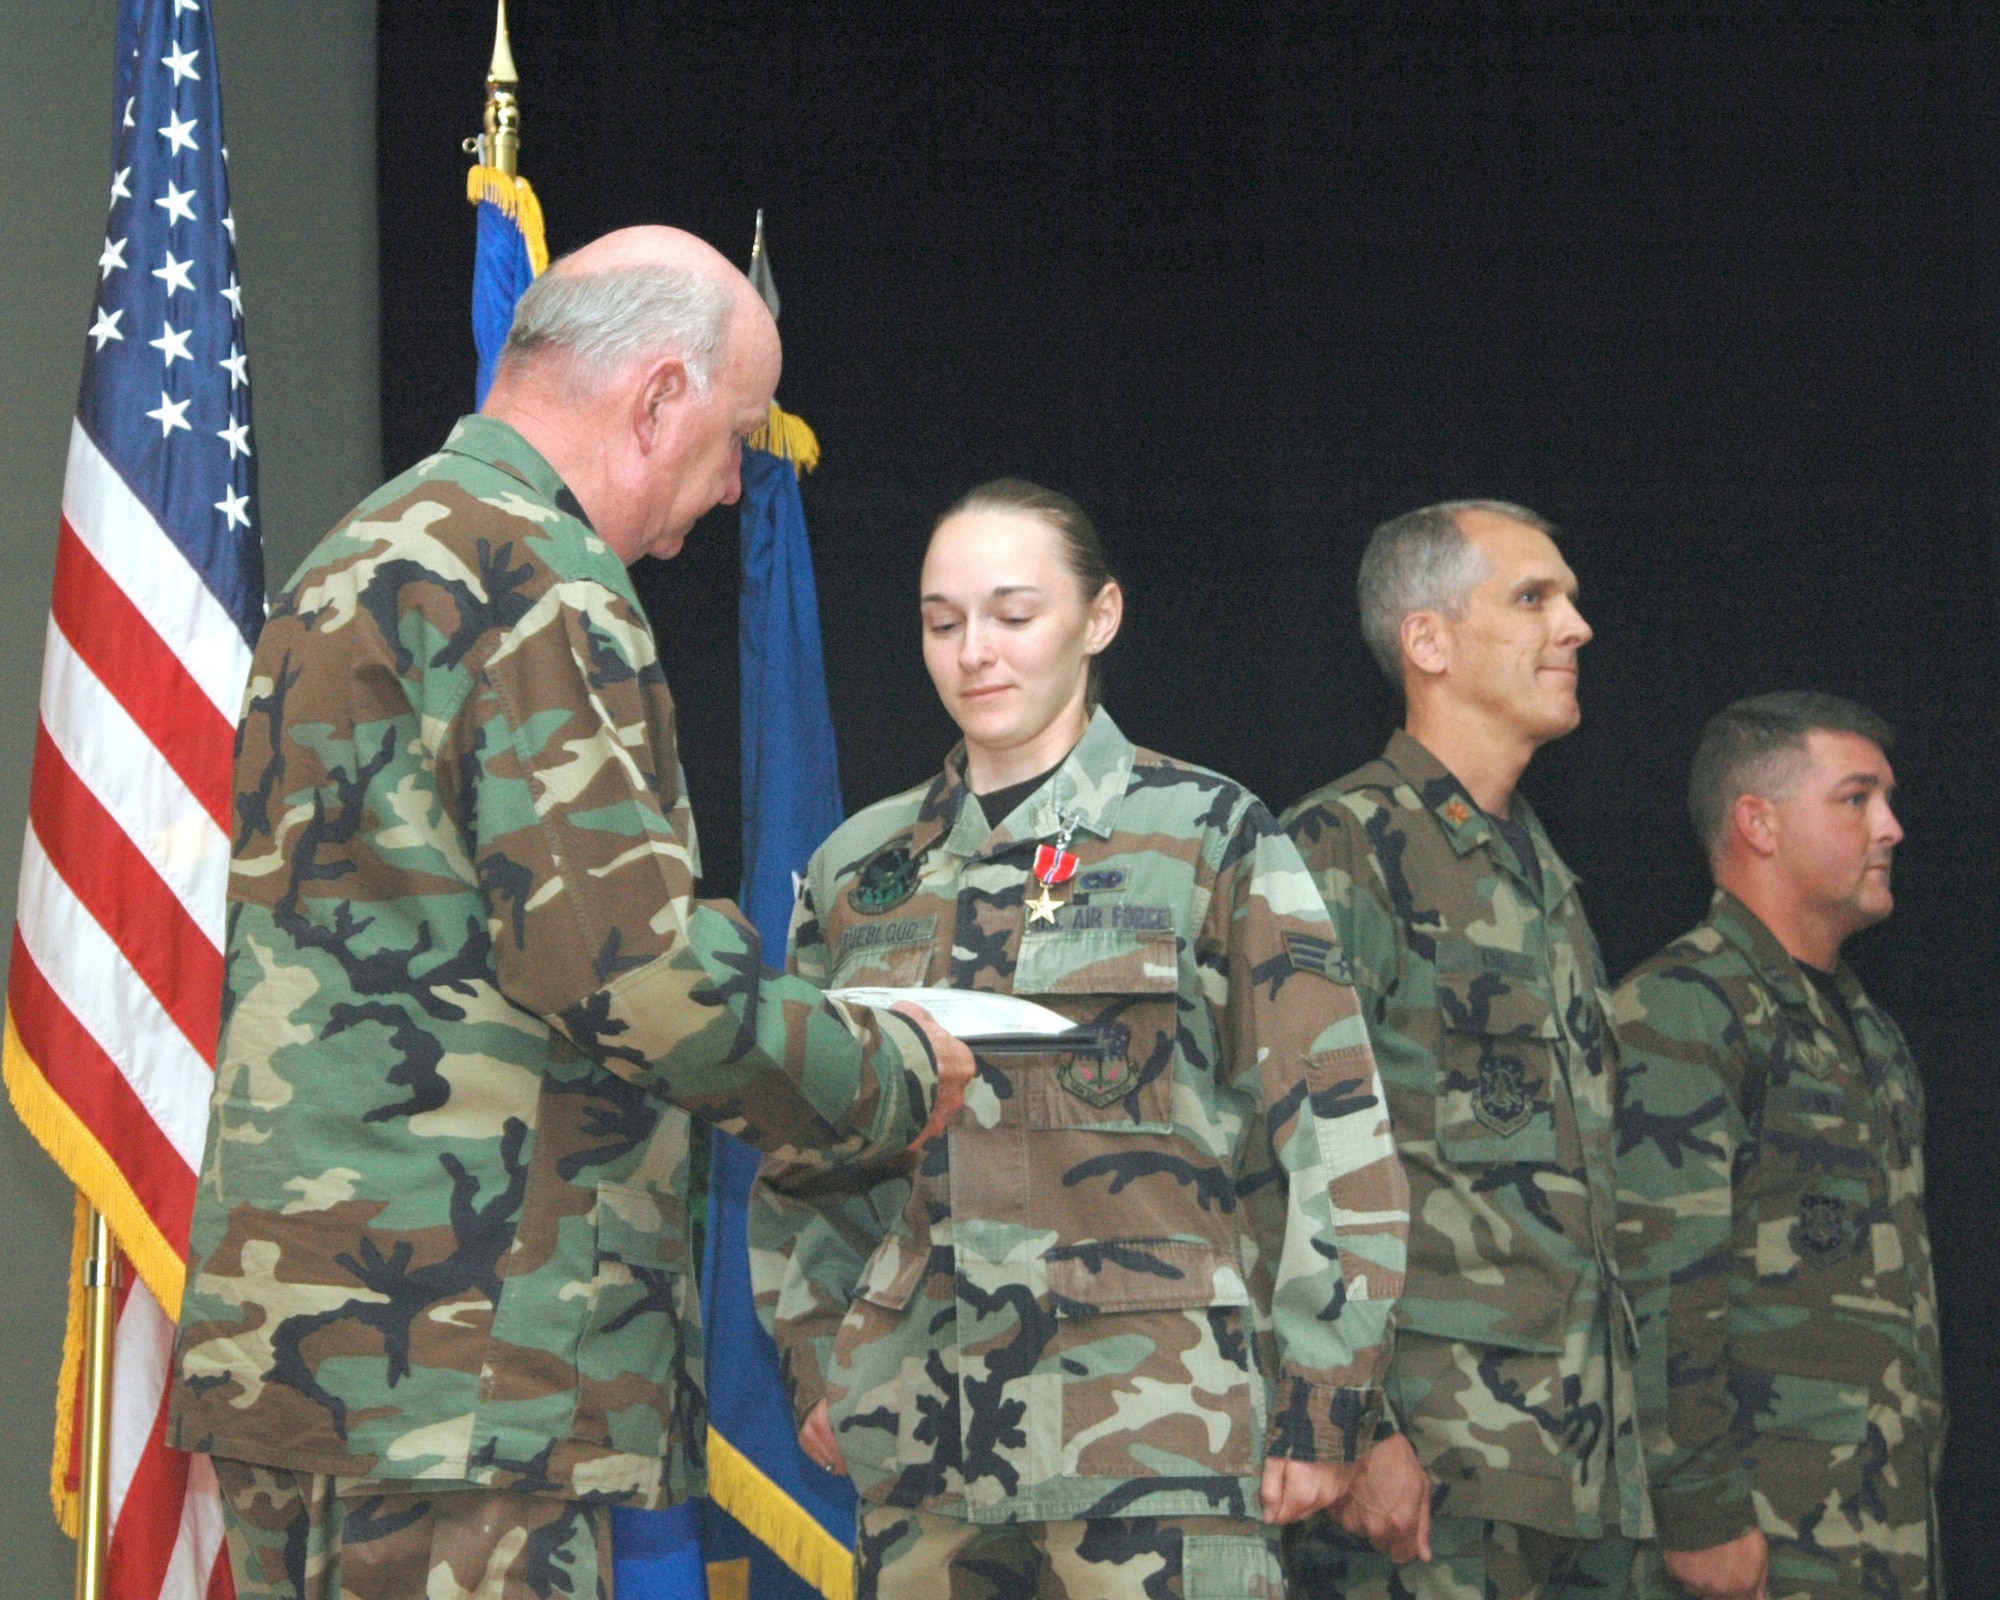 Maj. Gen. Thomas F. Deppe, 20th Air Force commander, presents Senior Airman Charity Trueblood, 341st Logistics Readiness Squadron, with the citation to accompany the Bronze Star Medal with Valor she received Sept. 14 for duties performed in support of the Global War on Terrorism. (U.S. Air Force photo by Airman Emerald Ralston)